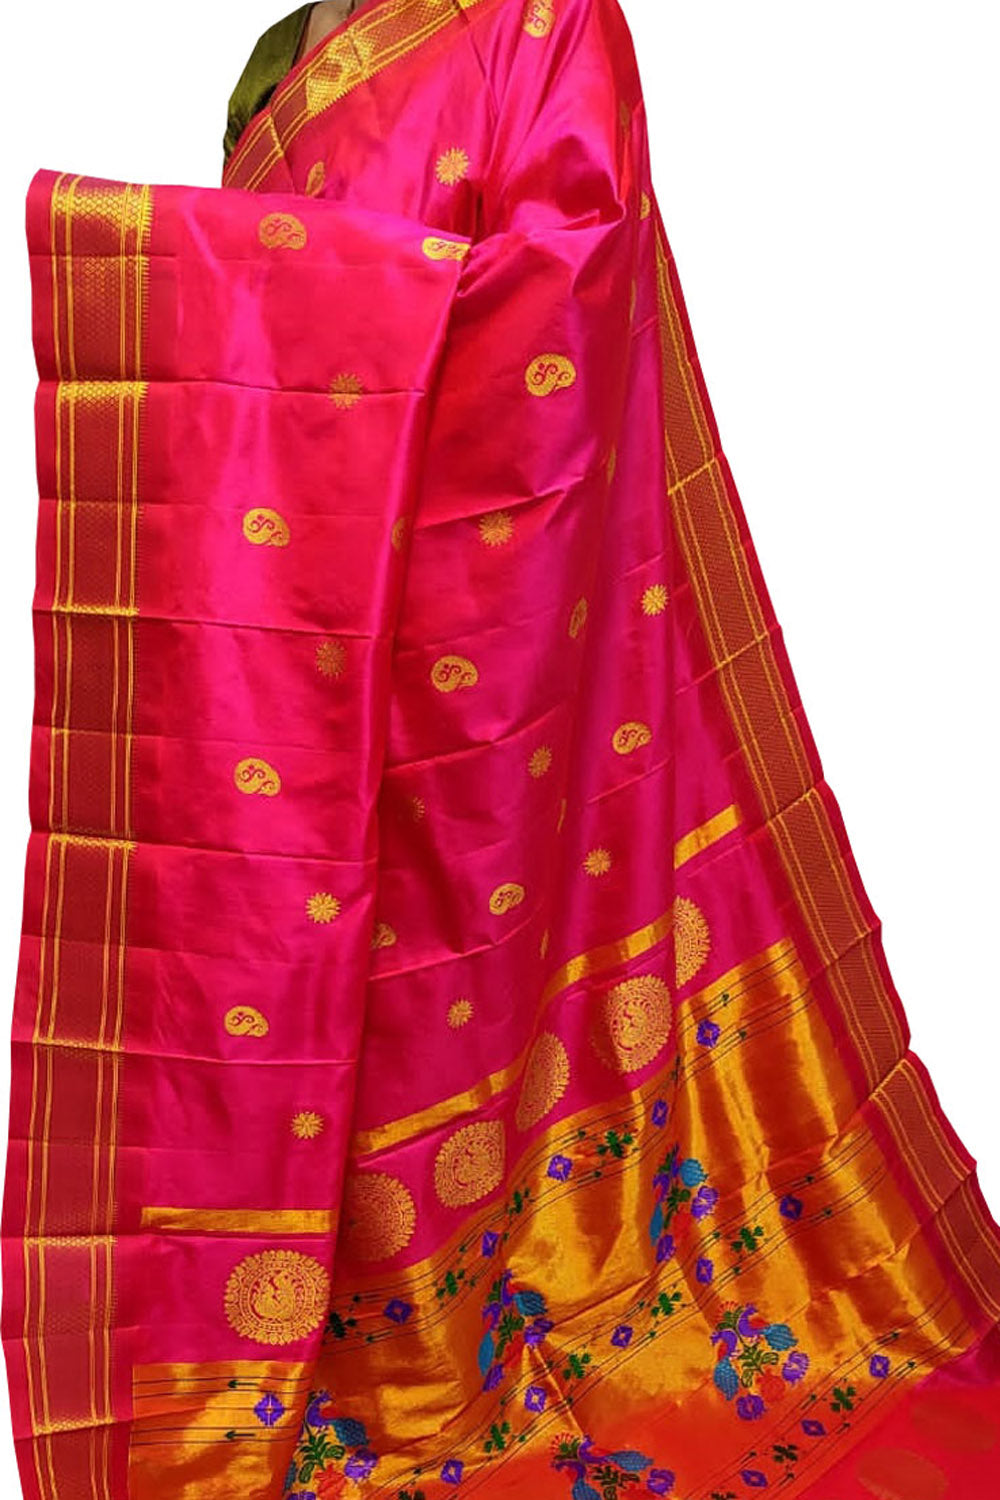 Stunning Pink Handloom Paithani Pure Silk Saree - Perfect for Any Occasion!